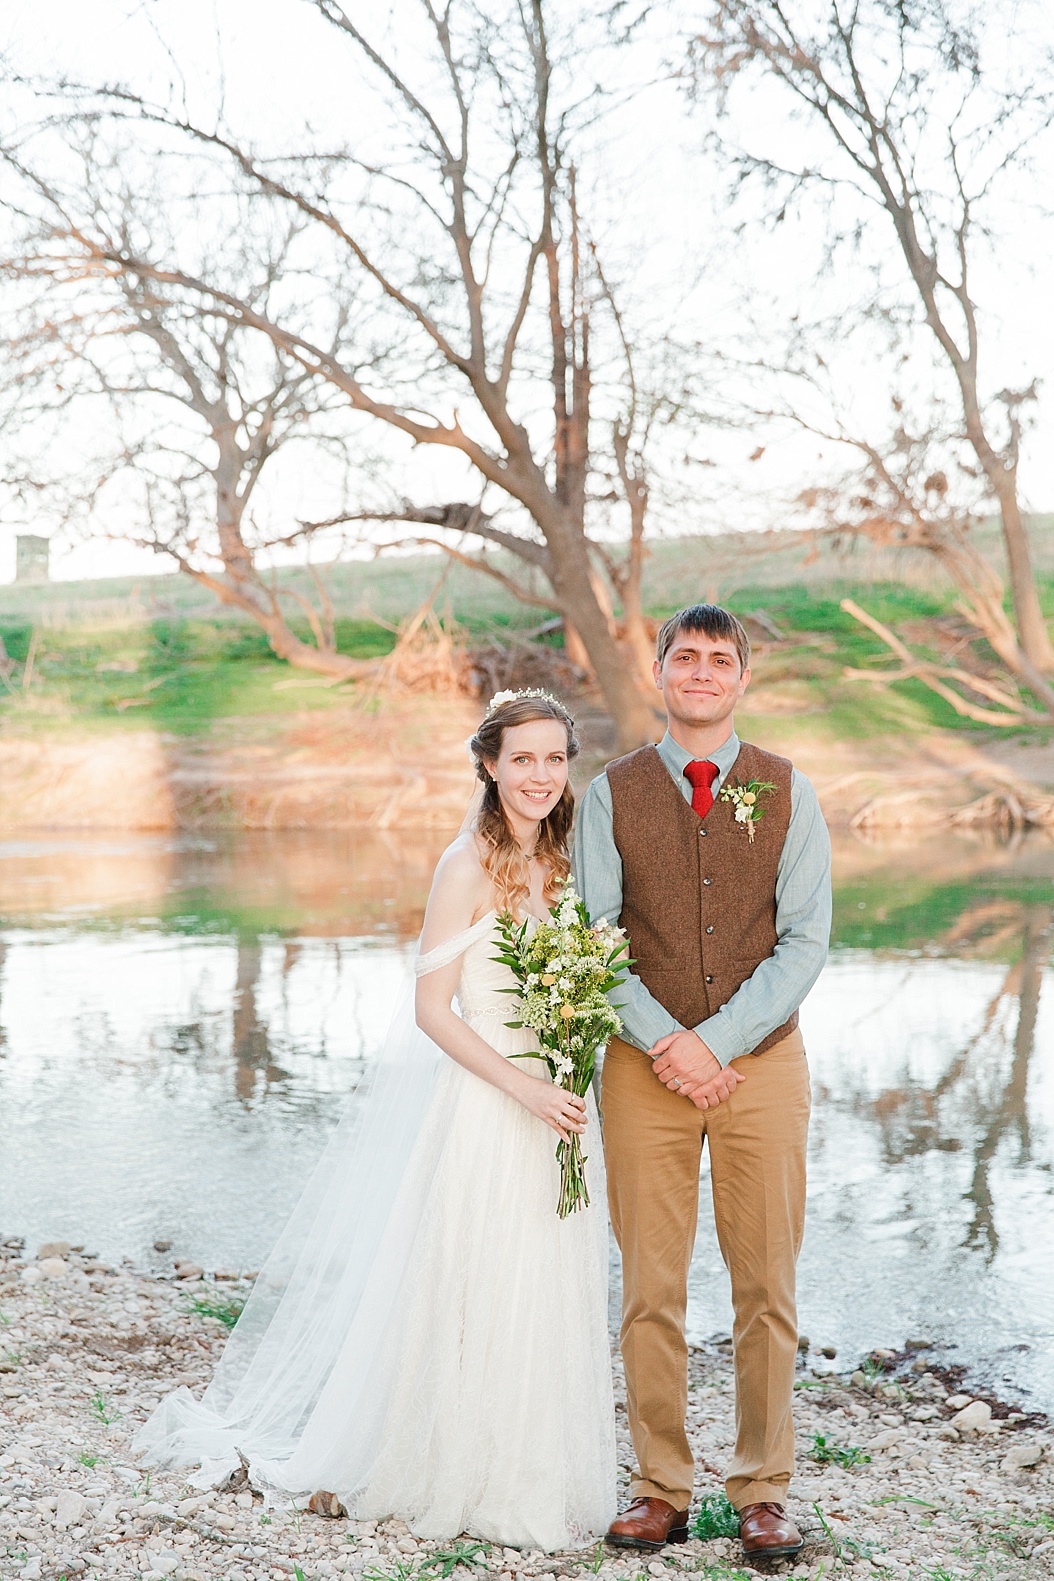 A spring boho wedding with greenery at Cherokee Rose Venue in Comfort Texas by Boerne Wedding Photographer Allison Jeffers Wedding Photography 0086